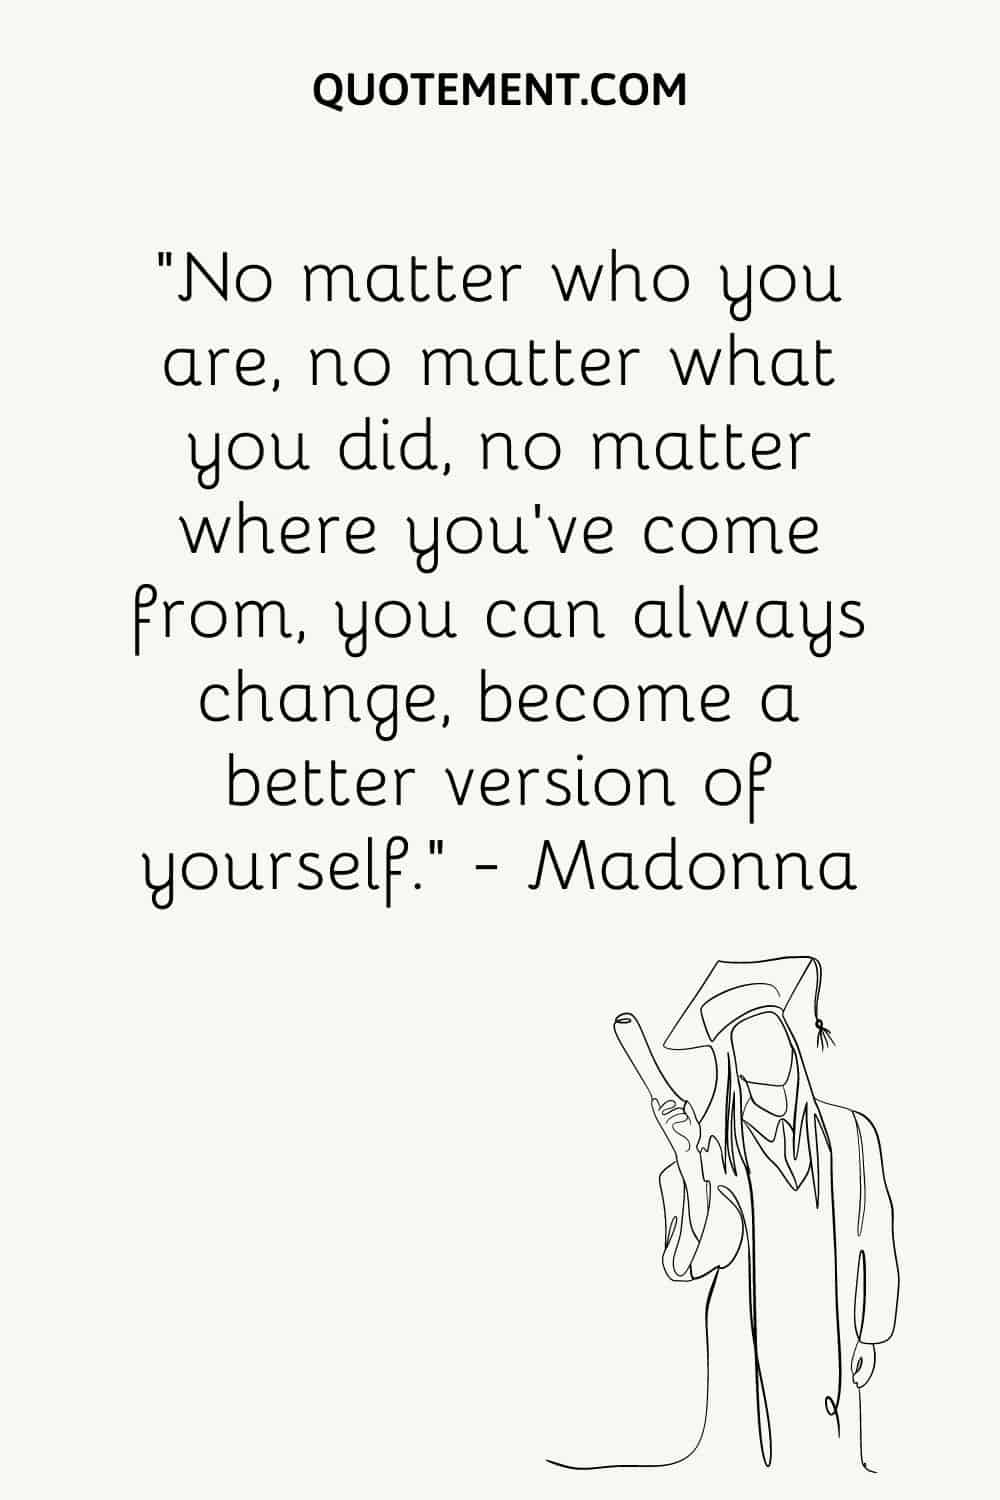 No matter who you are, no matter what you did, no matter where you’ve come from, you can always change, become a better version of yourself